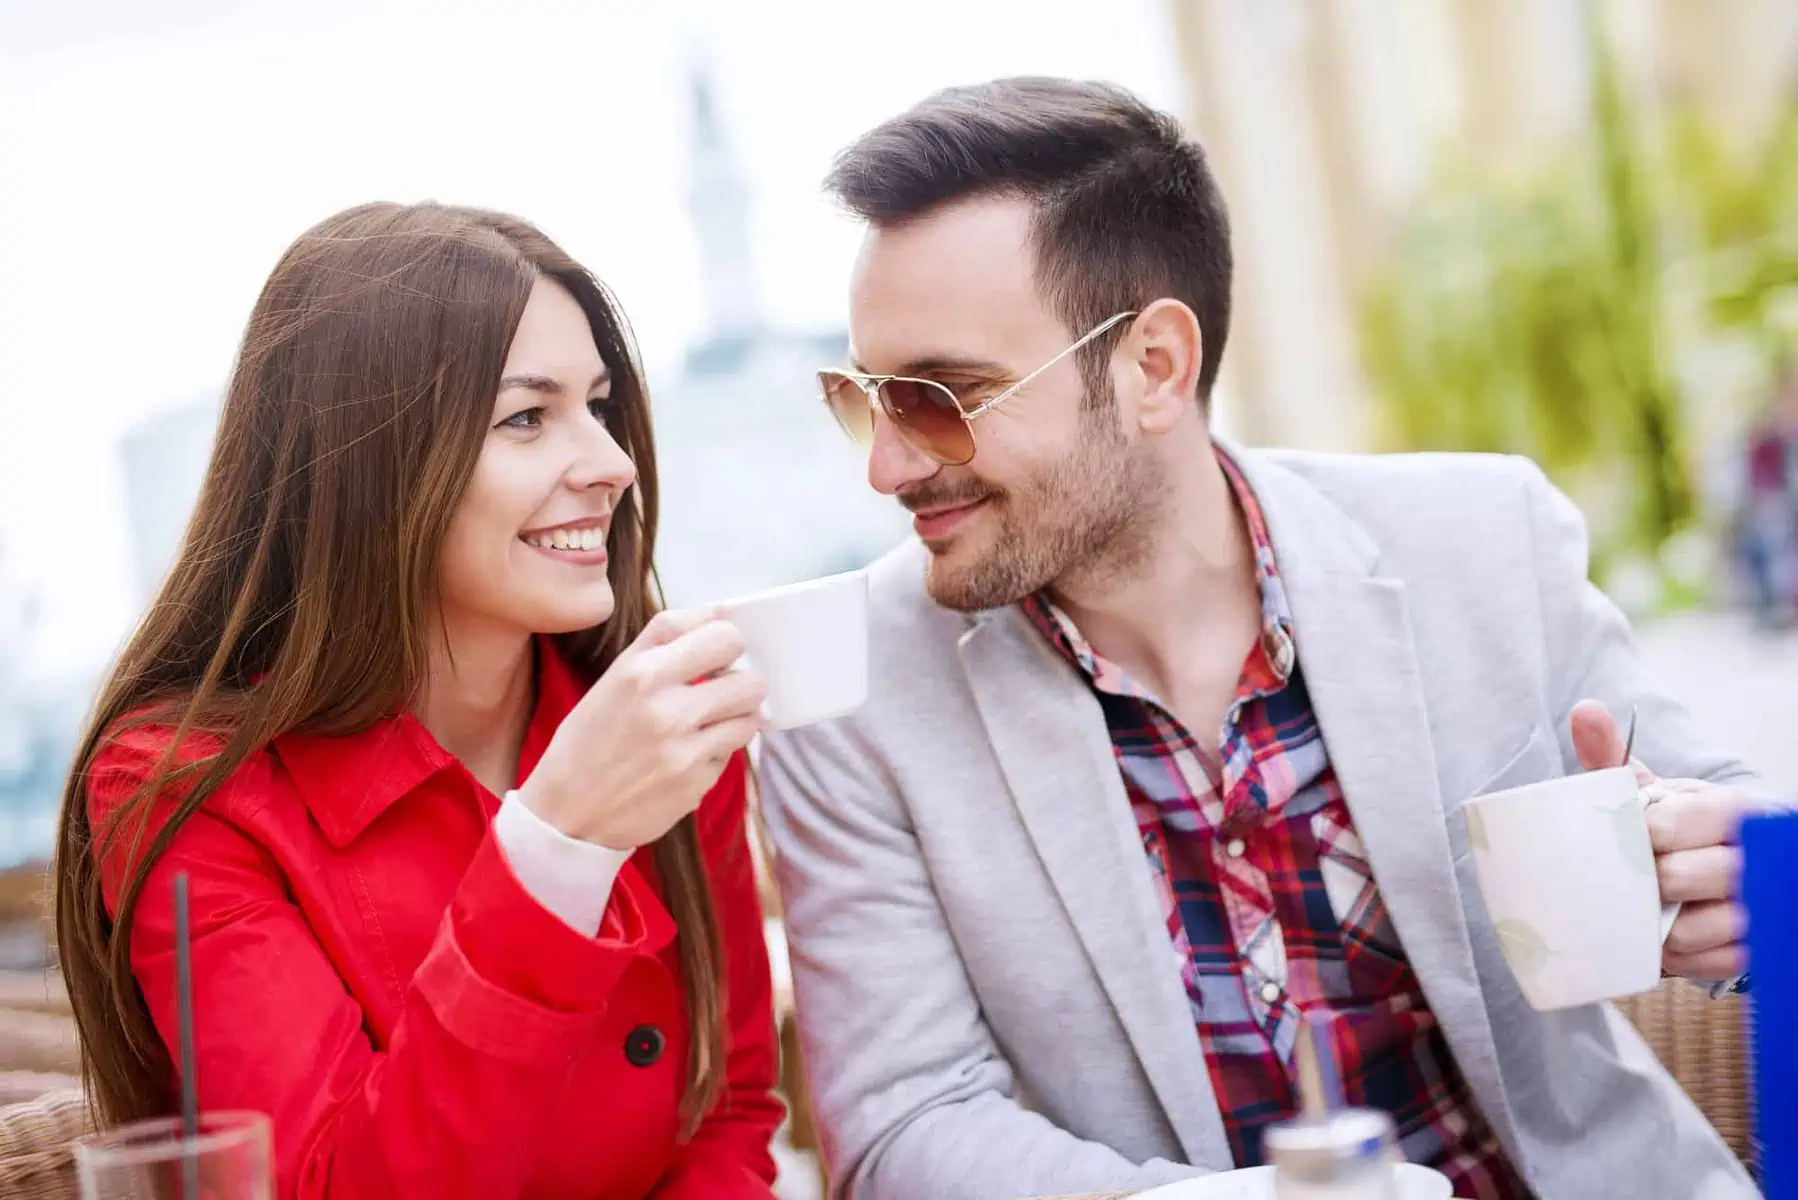 17 Signs You Are Involved With A Serial Dater And What To Do If You Are